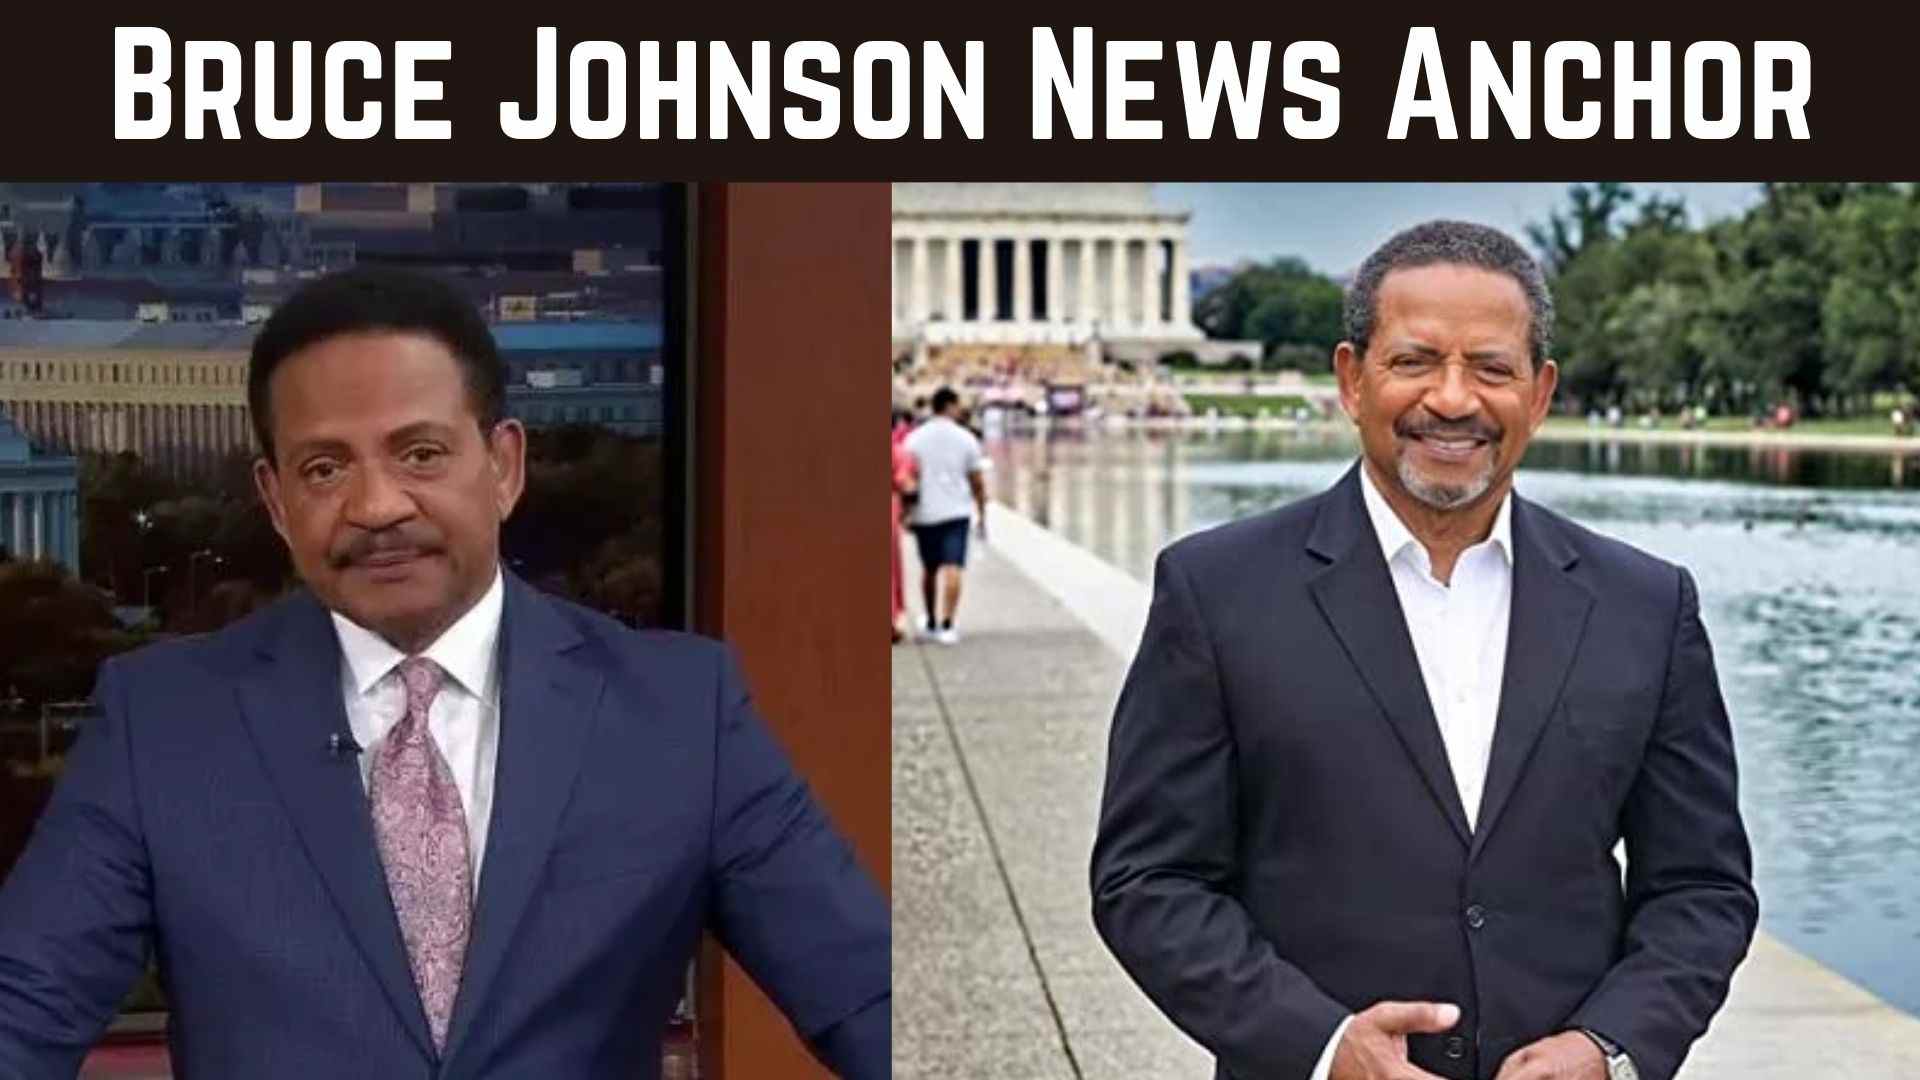 Bruce Johnson News Anchor Wallpaper and images